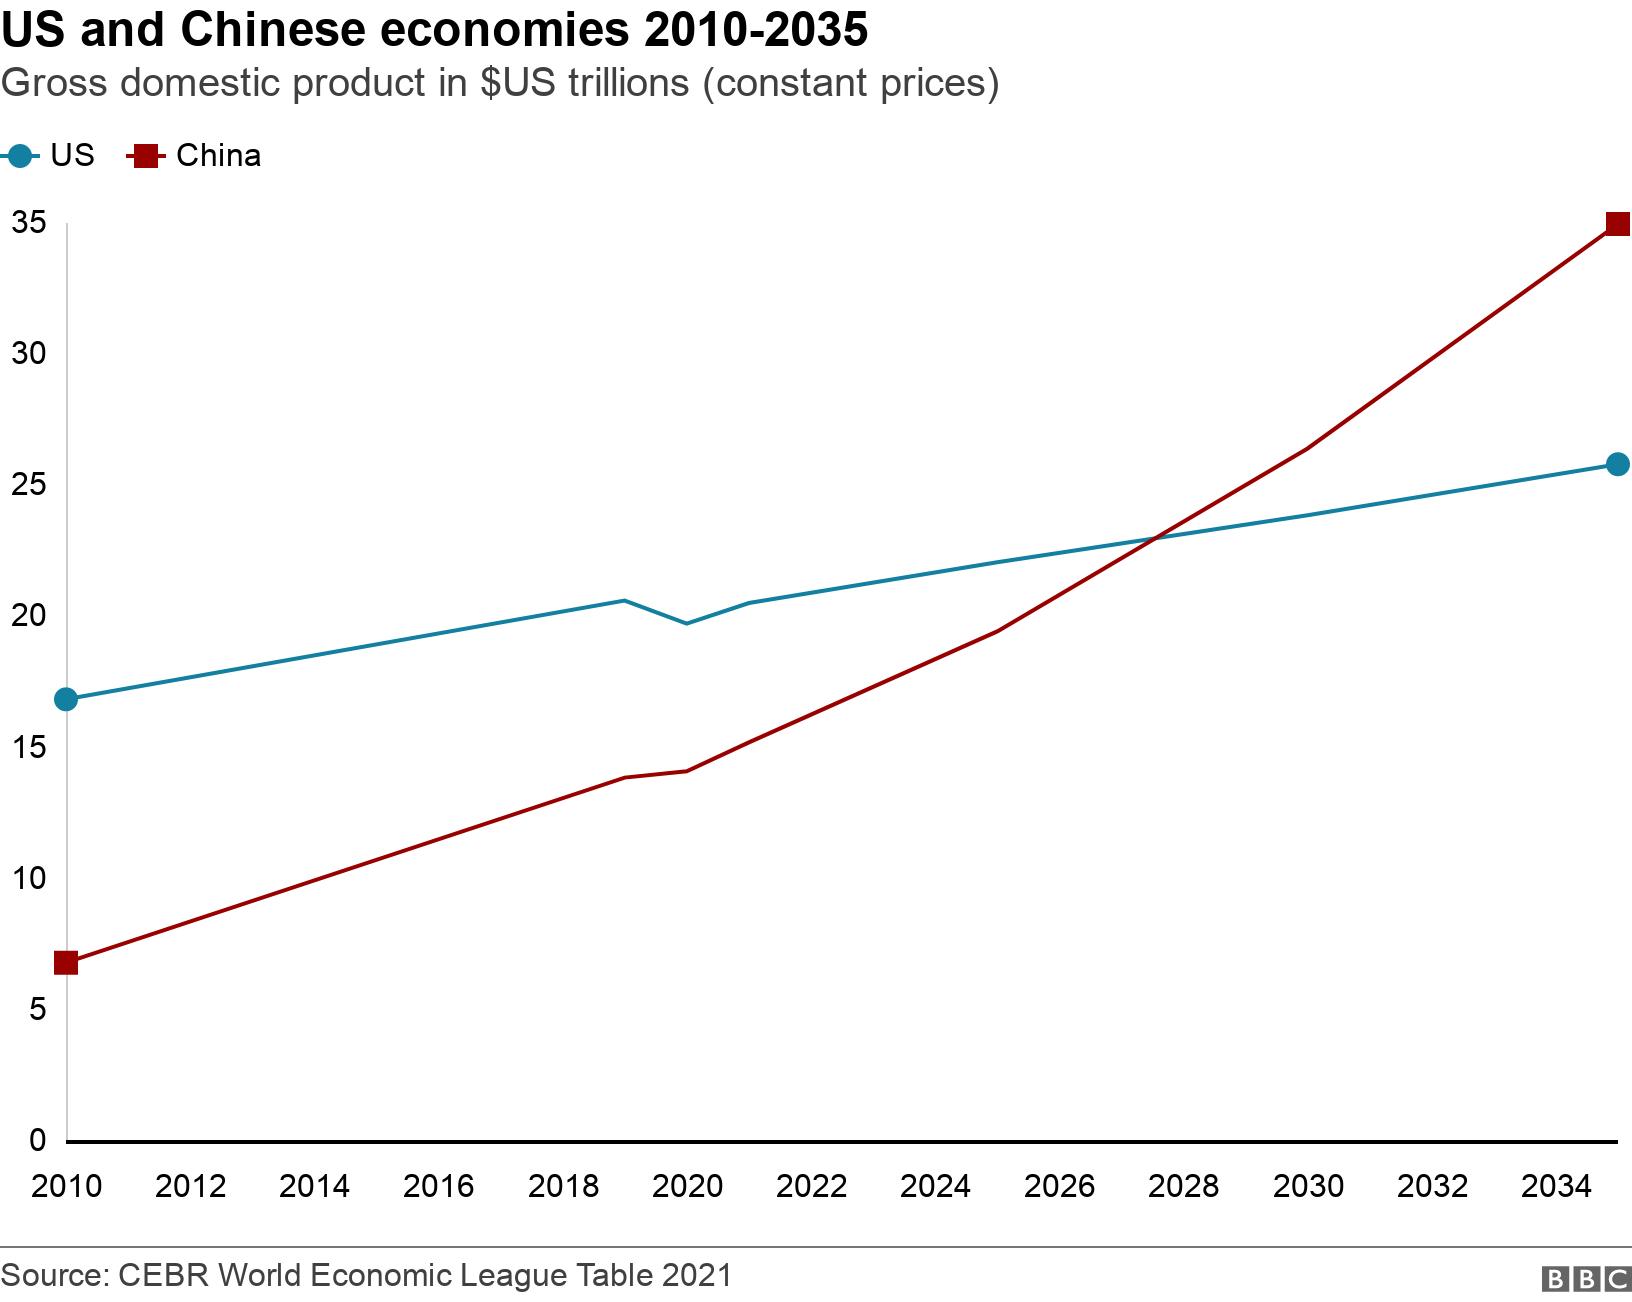 US and Chinese economies 2010-2035. Gross domestic product in $US trillions (constant prices). Chart shows Chinese and US economic output over time with China overtaking the US around 2028 .